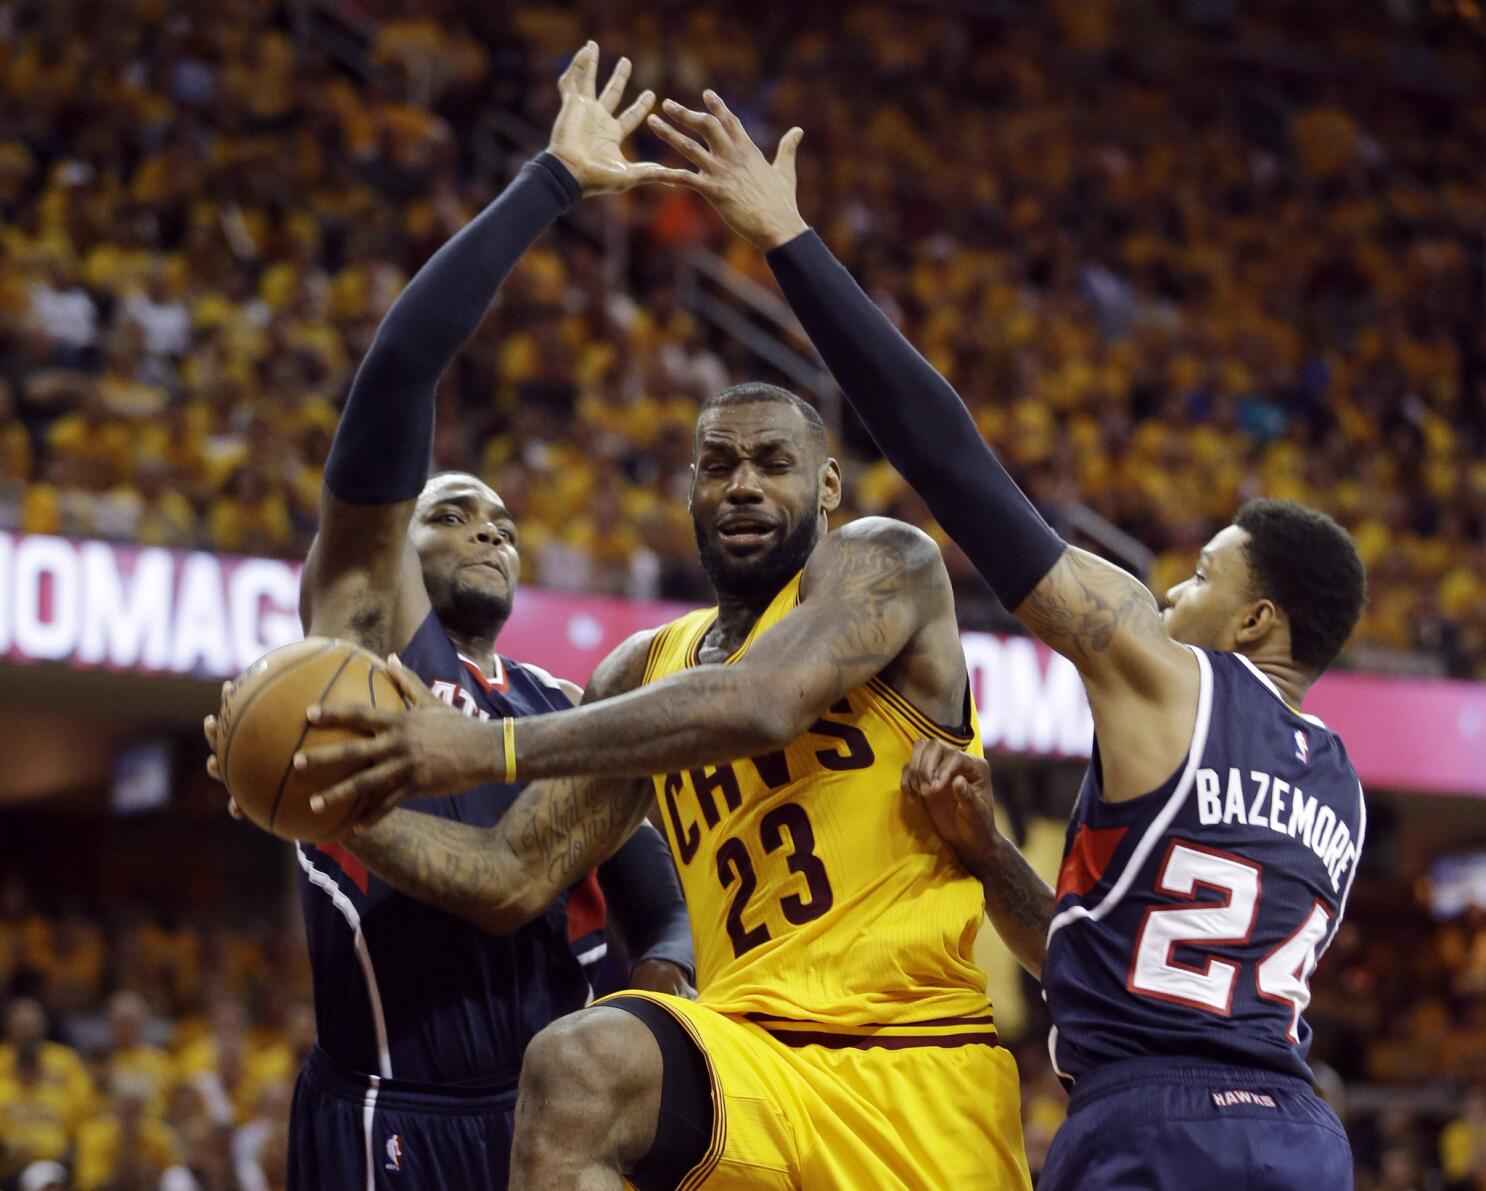 LeBron James scores 41 to lead Cavaliers to record-breaking comeback win, LeBron James